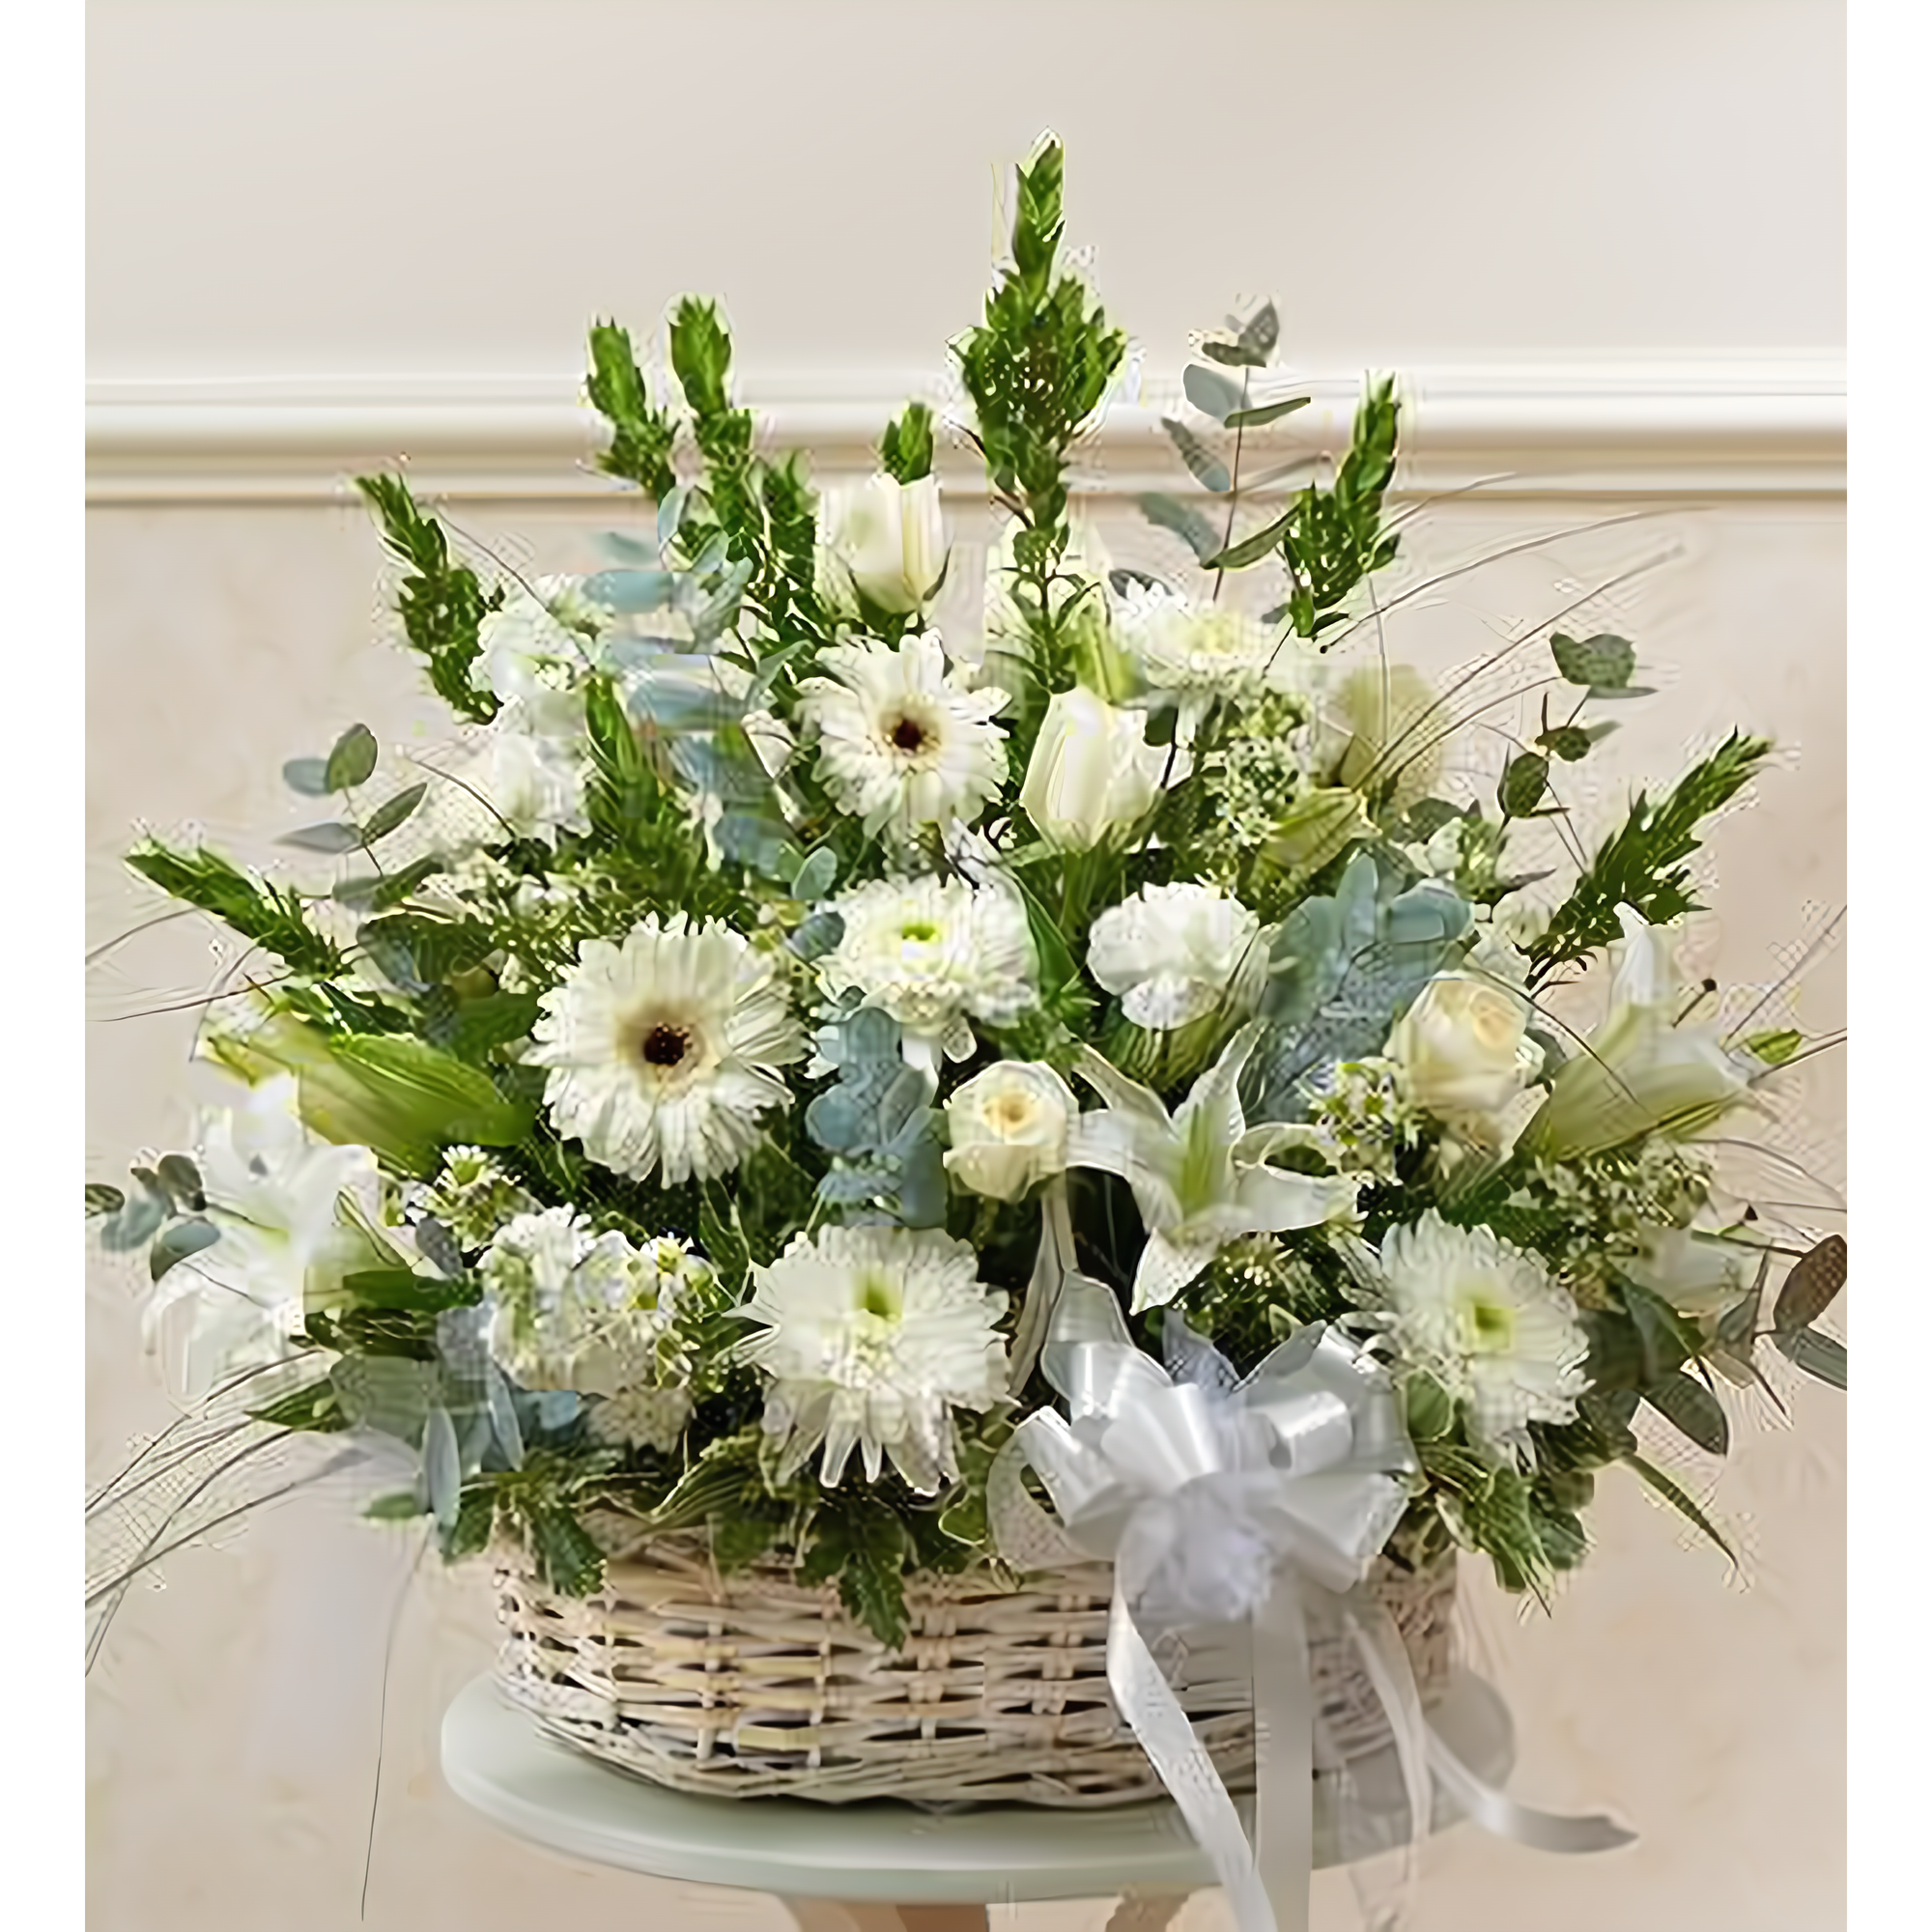 NYC Flower Delivery - White Sympathy Arrangement in Basket - Funeral > For the Service